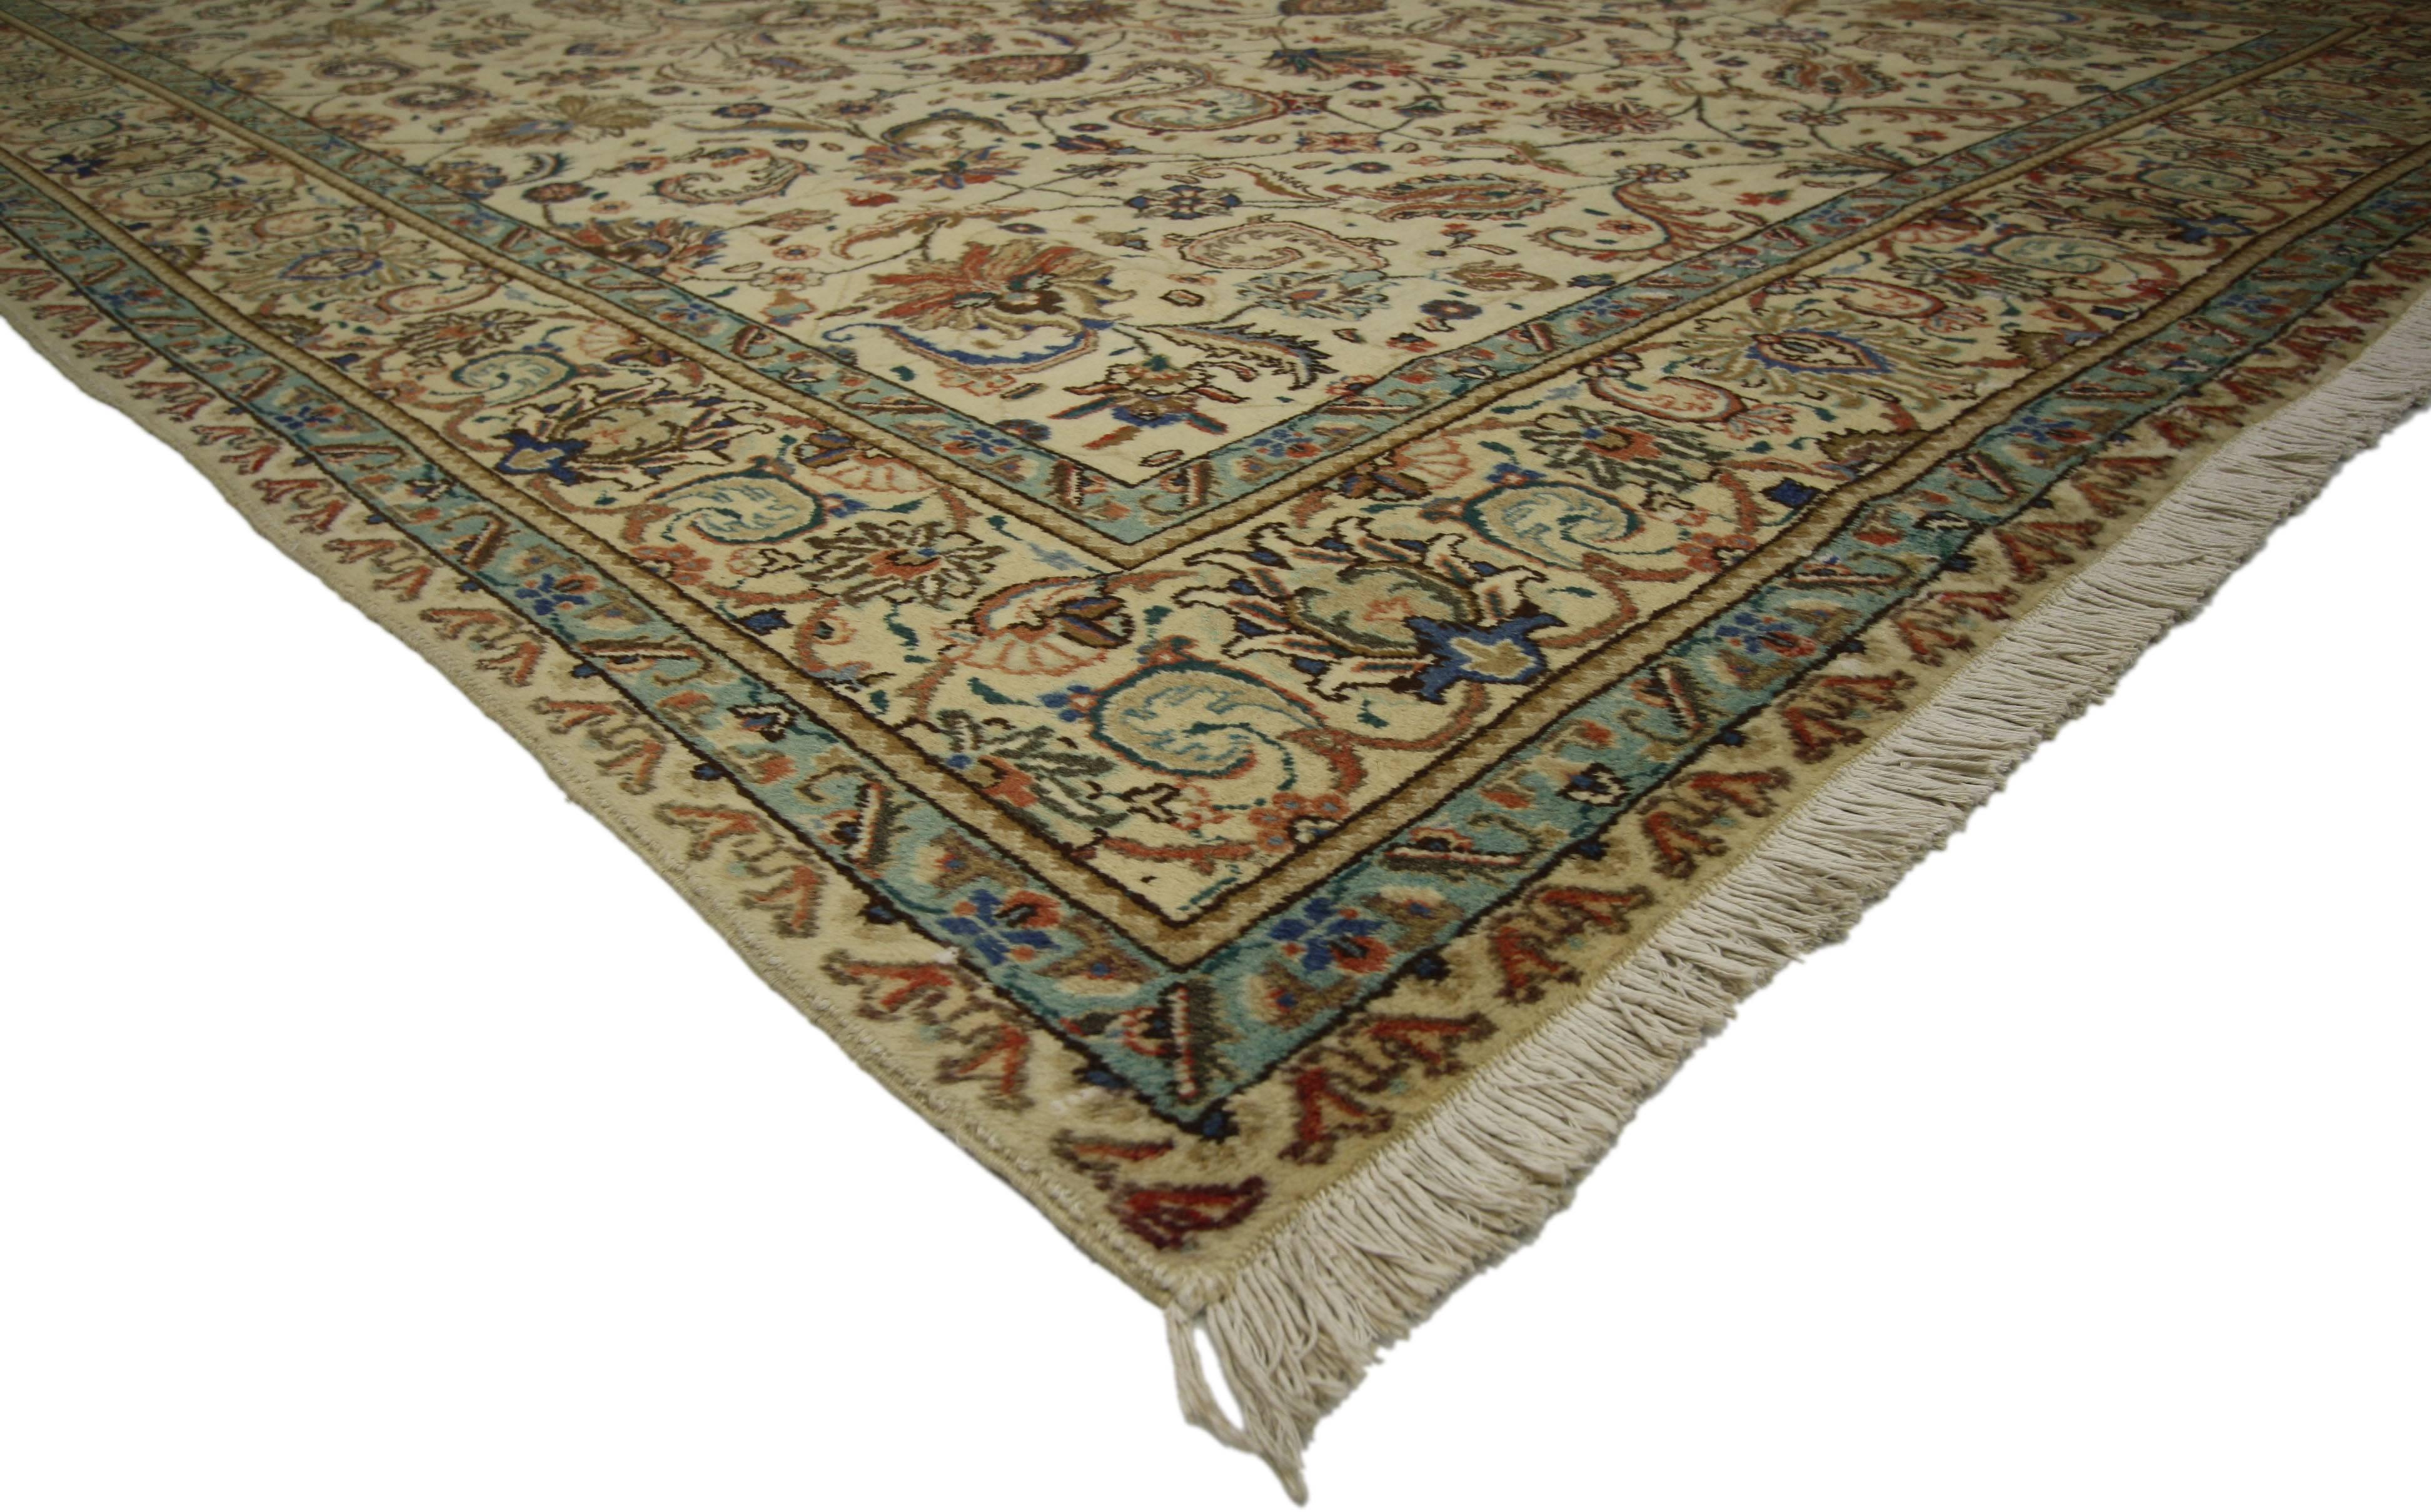 75588 Vintage Persian Tabriz Area Rug with French Country Chippendale Farmhouse Style. Timeless and refined, this hand-knotted wool vintage Persian Tabriz rug features an all-over floral patter composed of blooming palmettes, leafy tendrils,